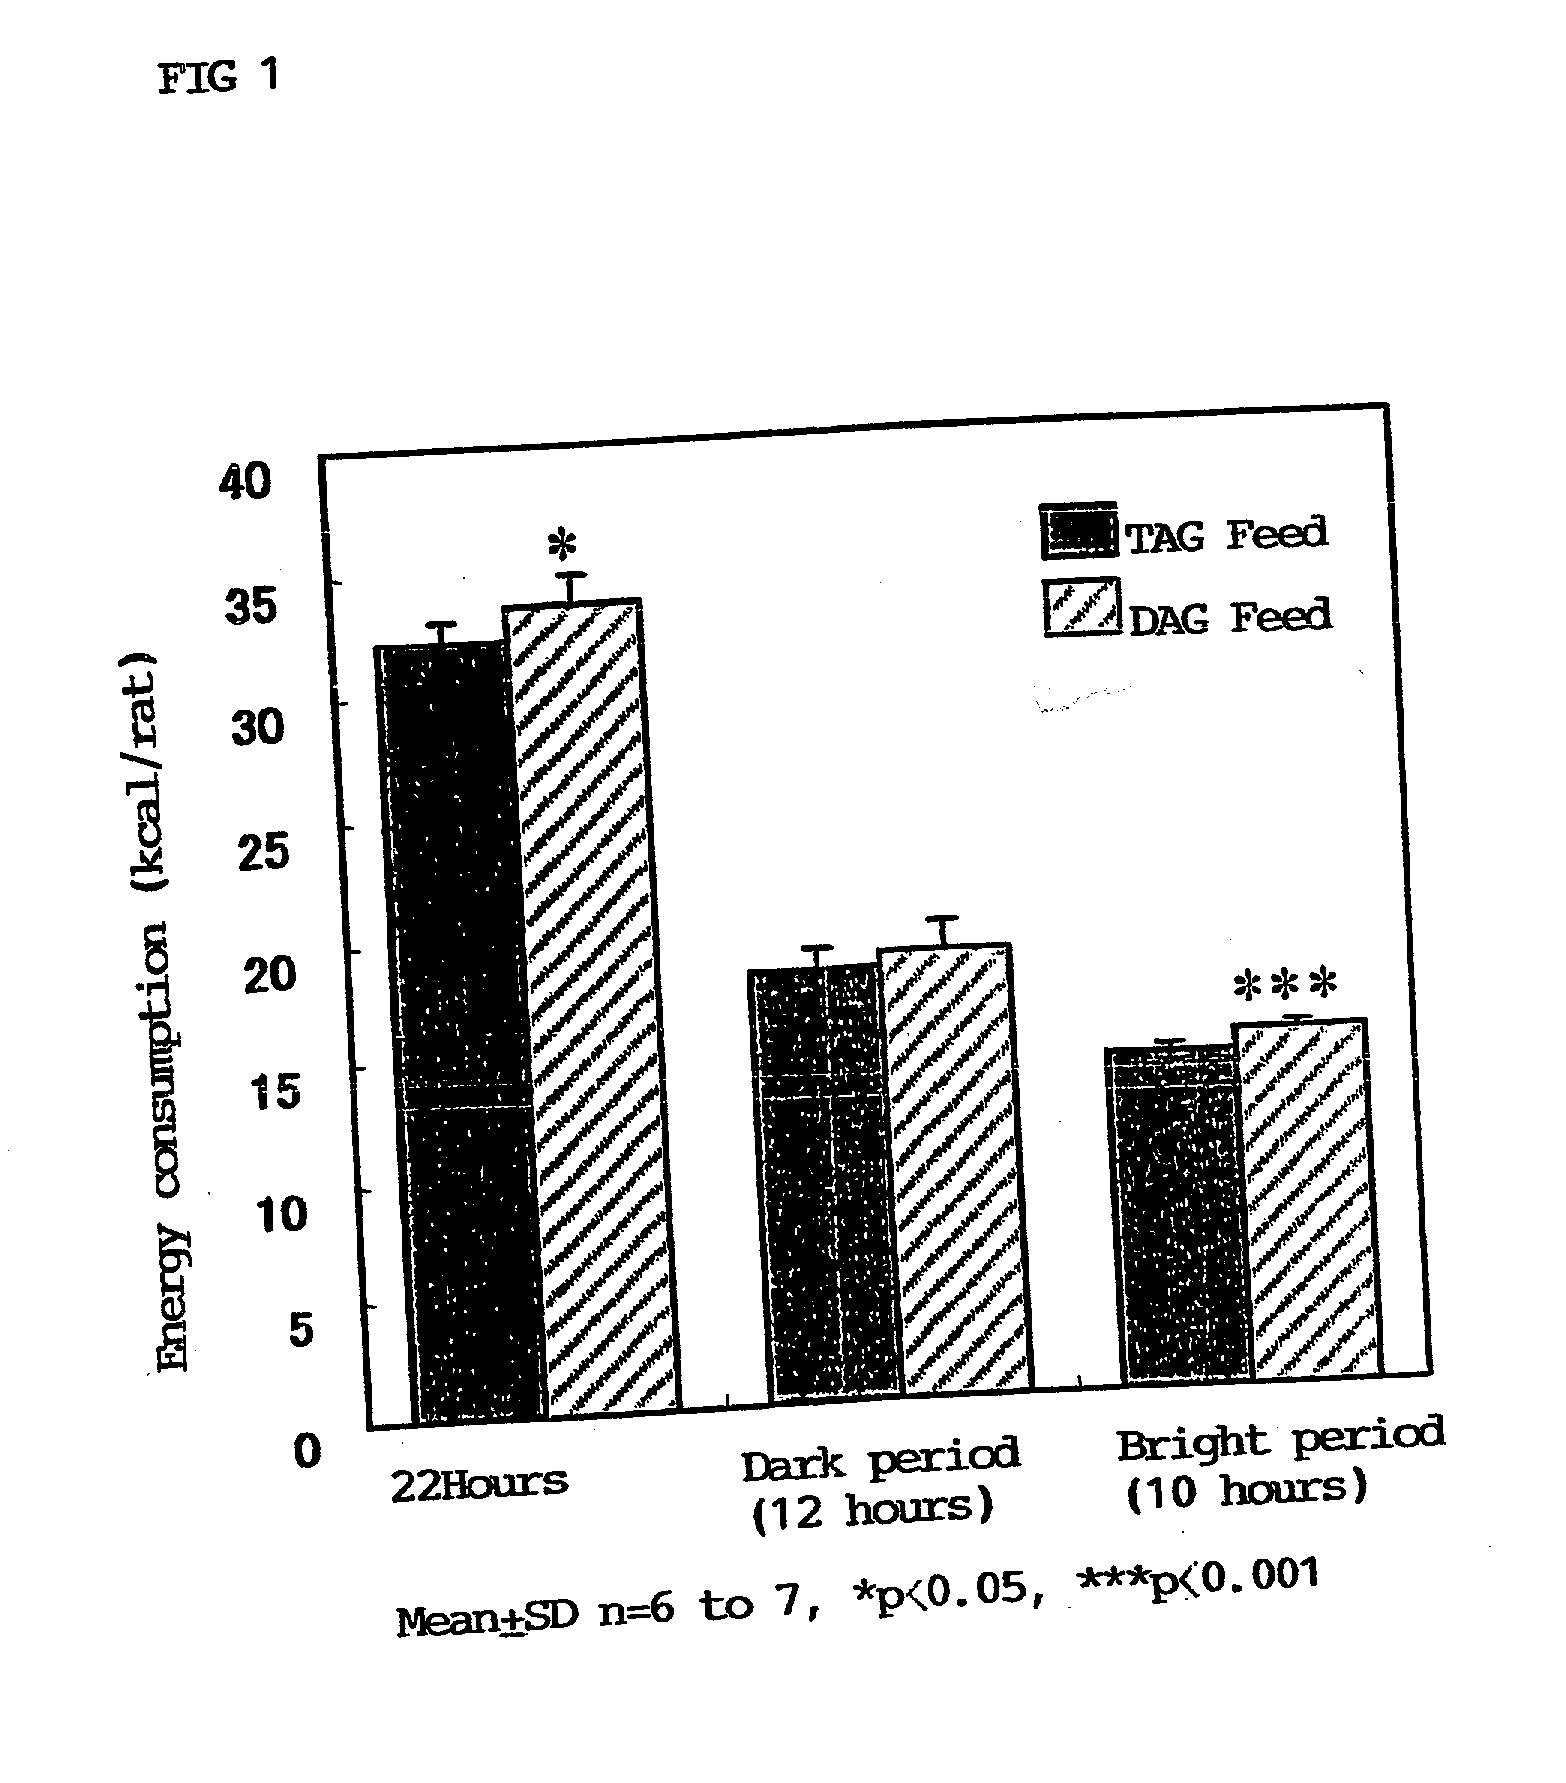 Method for activating the lipid catabolic metabolism in enteric epithelium and improving the lipid metabolism in enteric epithelium